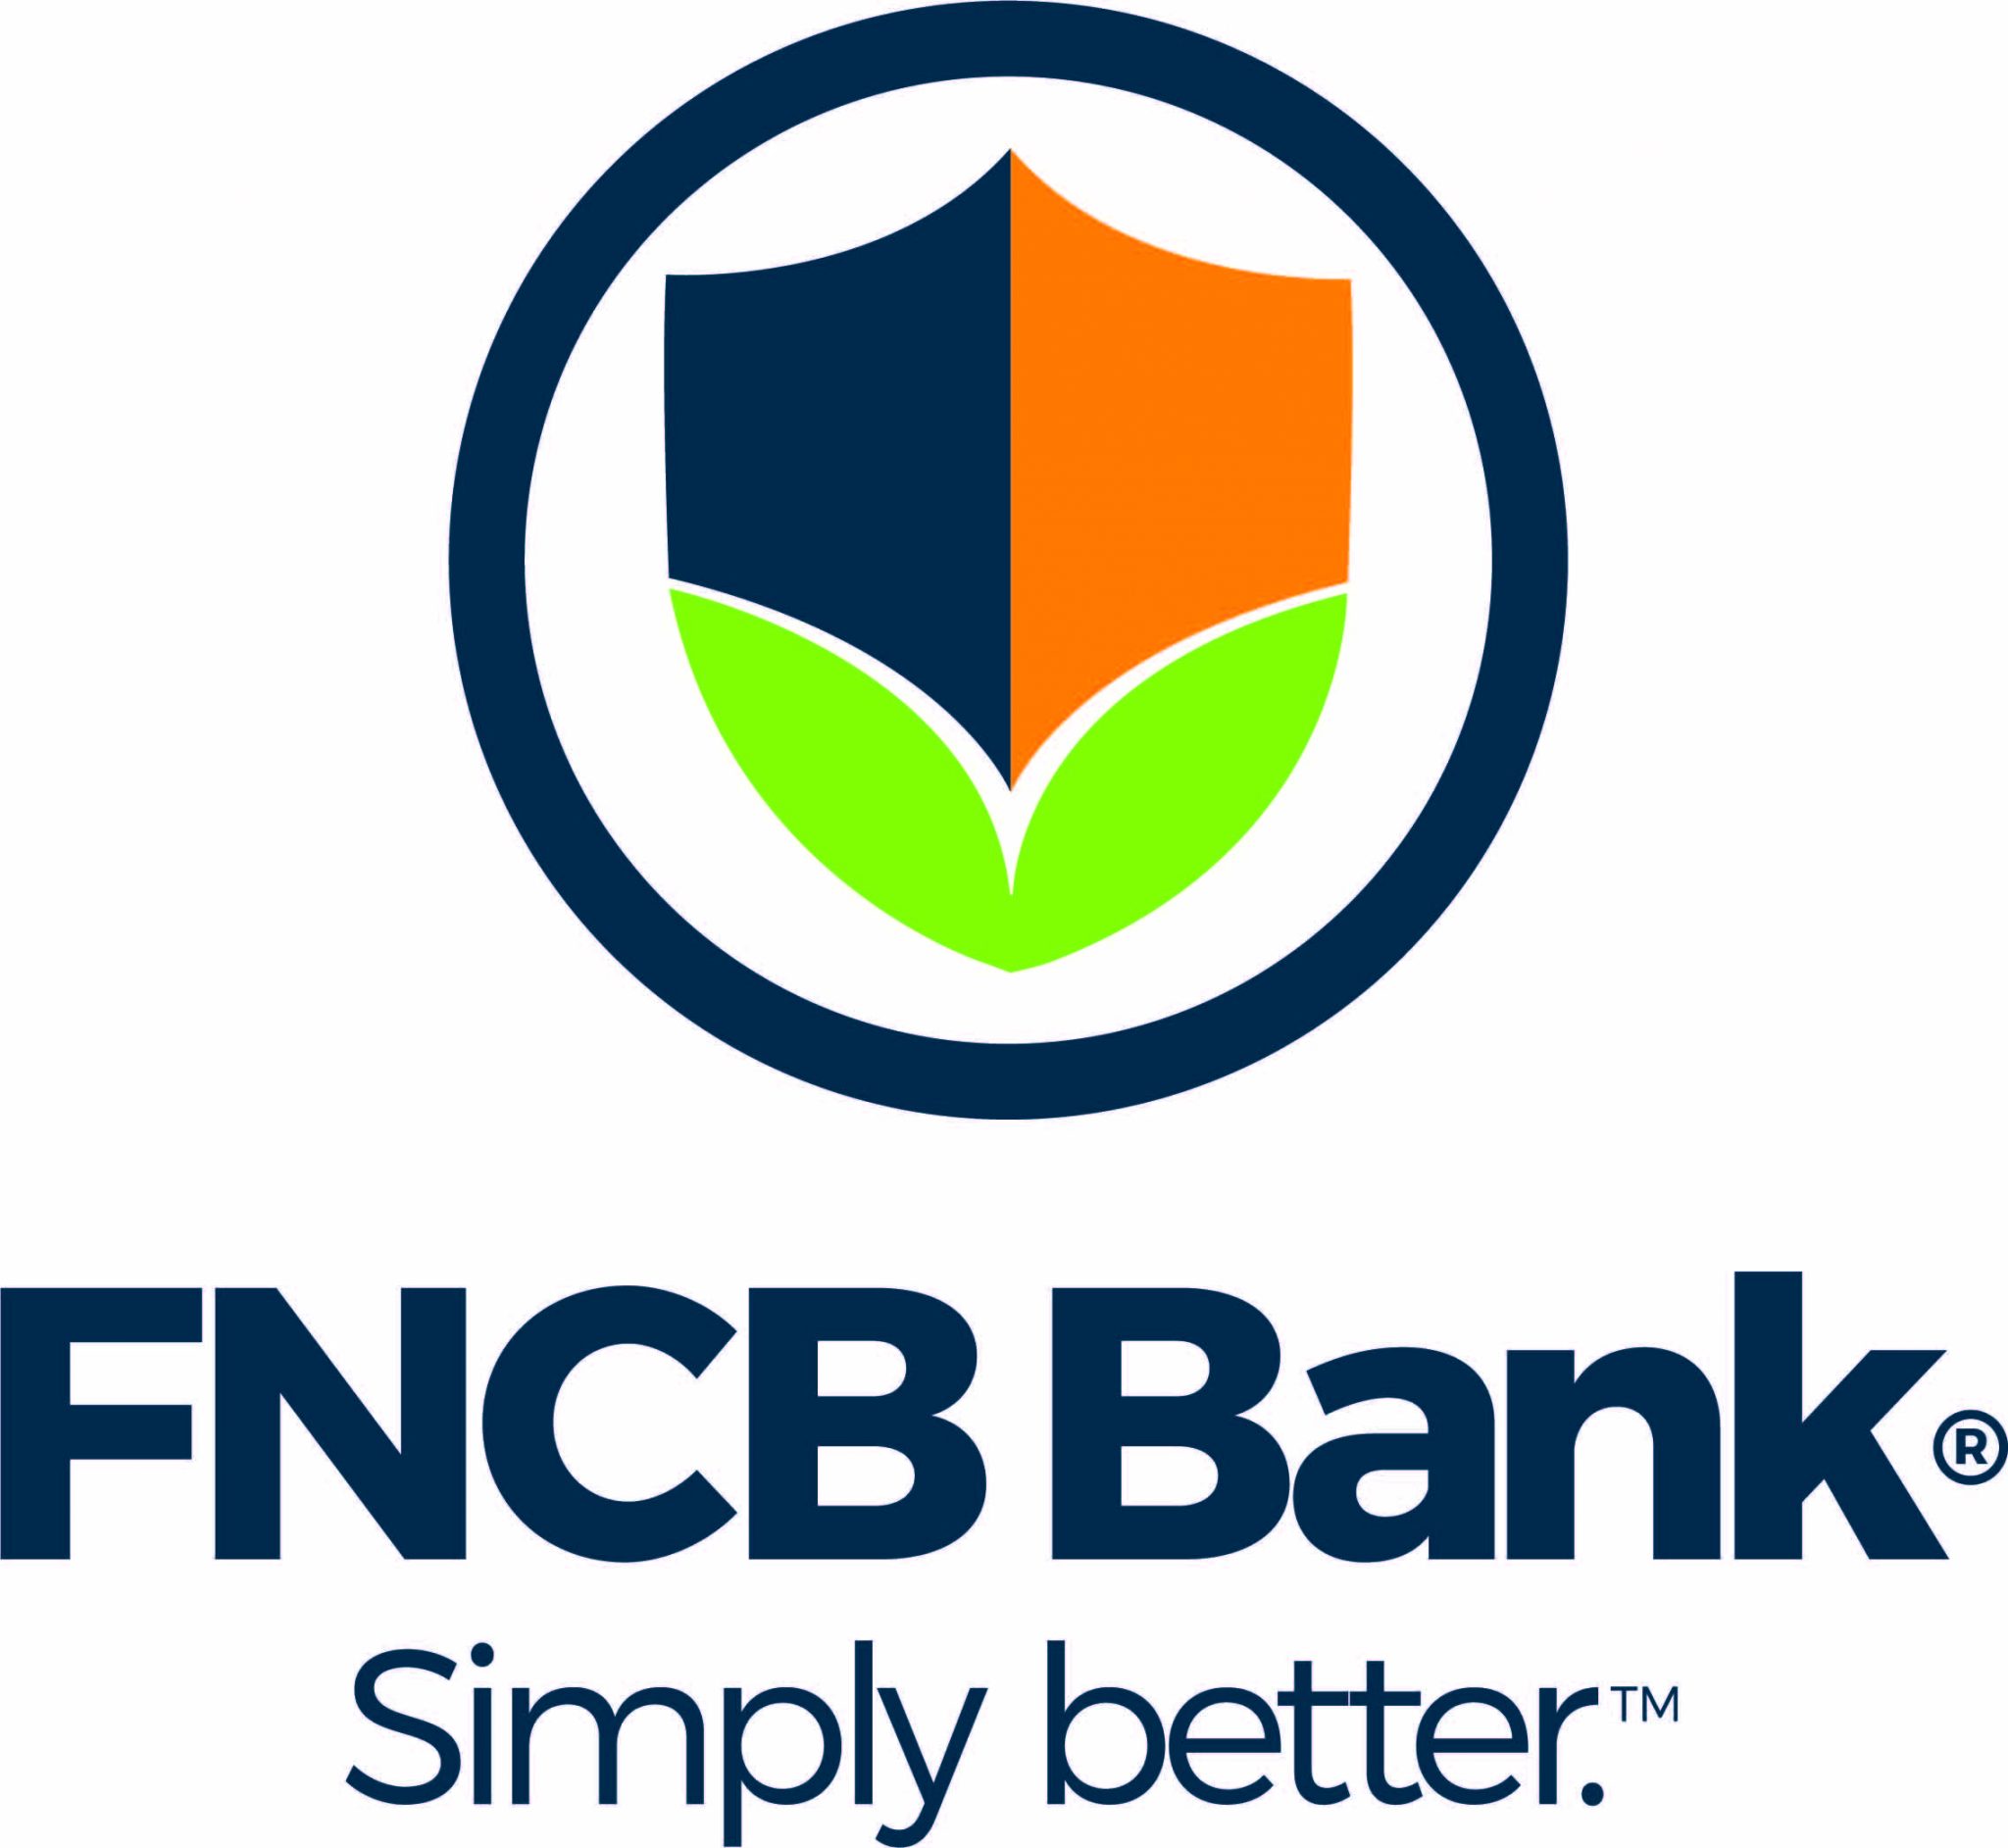 FNCB Bank Pledges $2,500 to United Way of Wyoming Valley